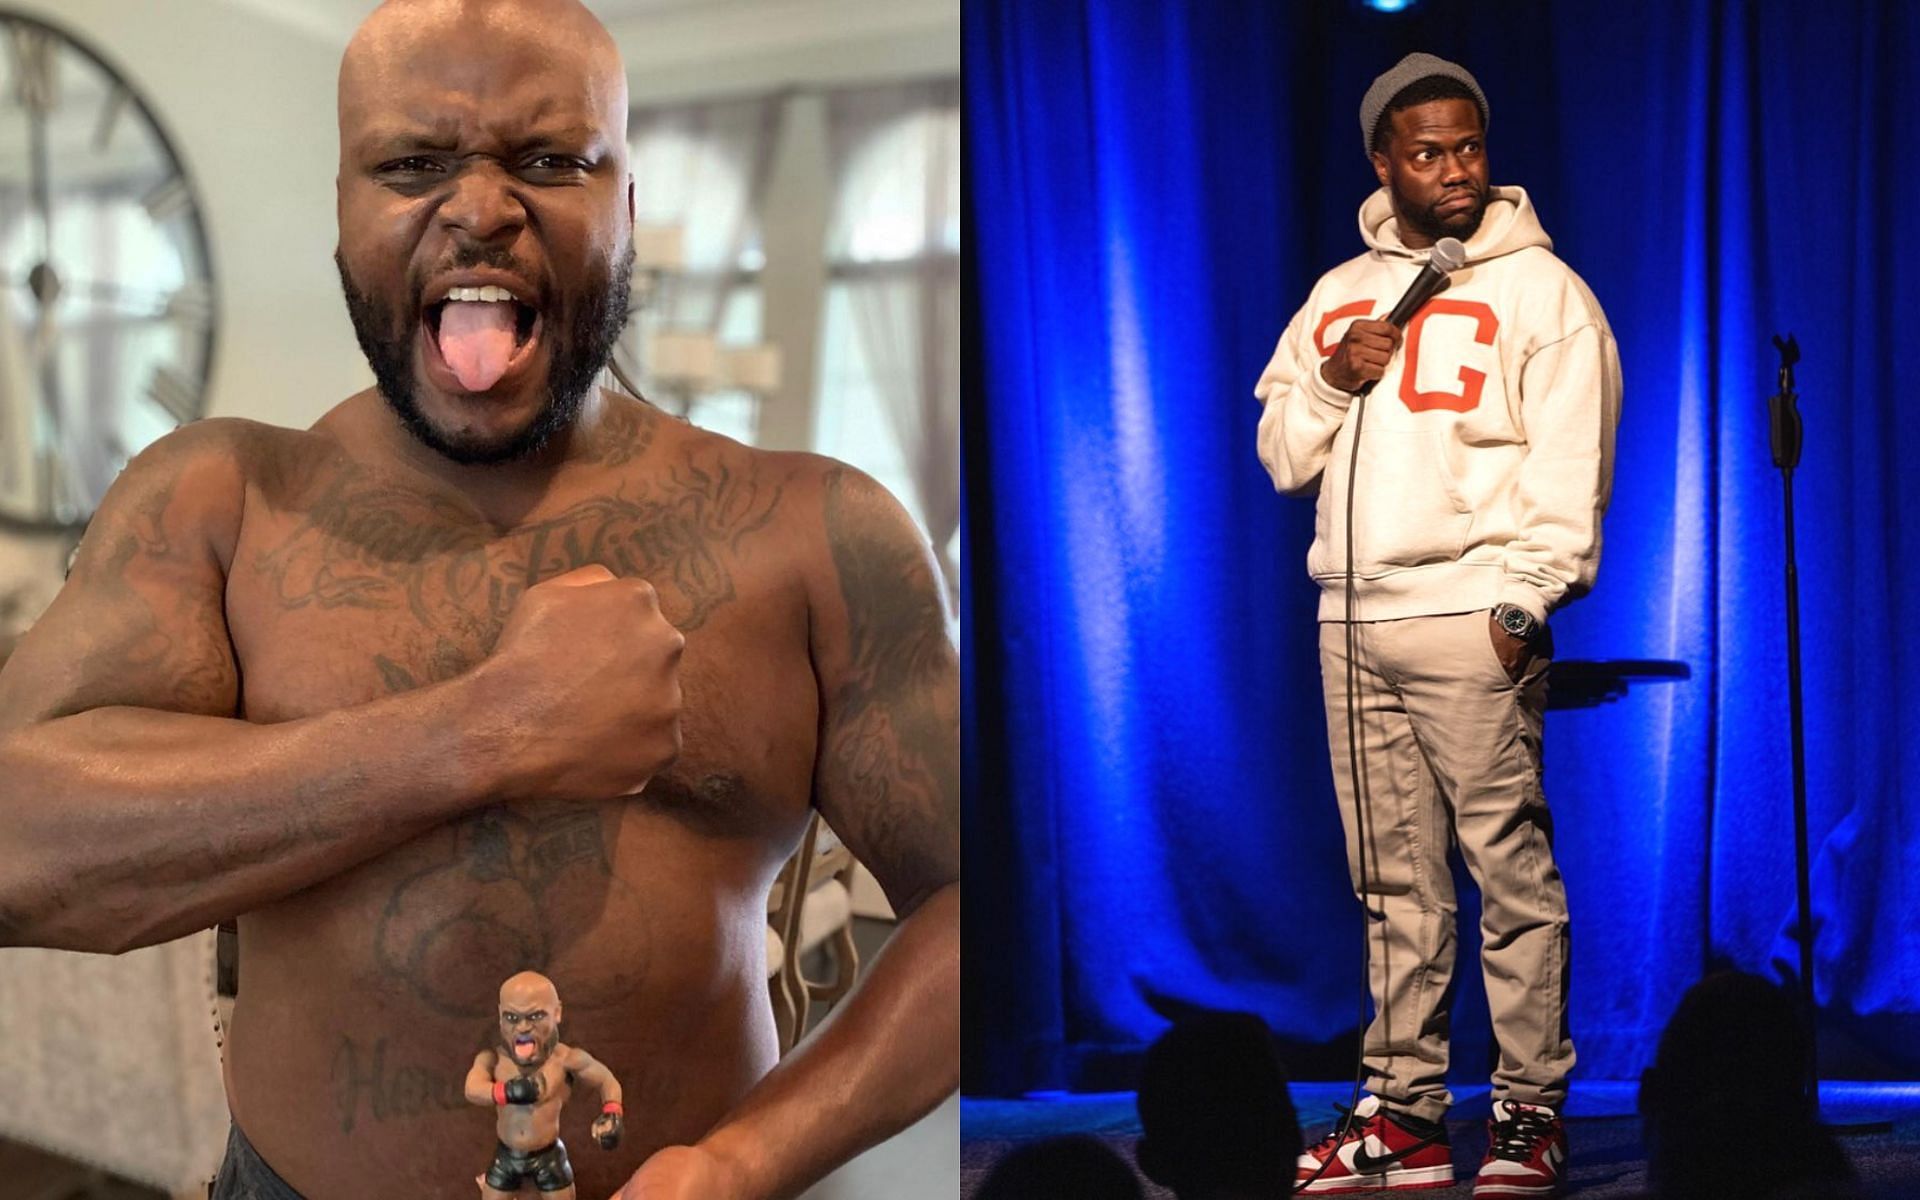 Derrick Lewis (left), Kevin Hart (right) [Images courtesy: @thebeastufc and @kevinhart4real via Instagram]